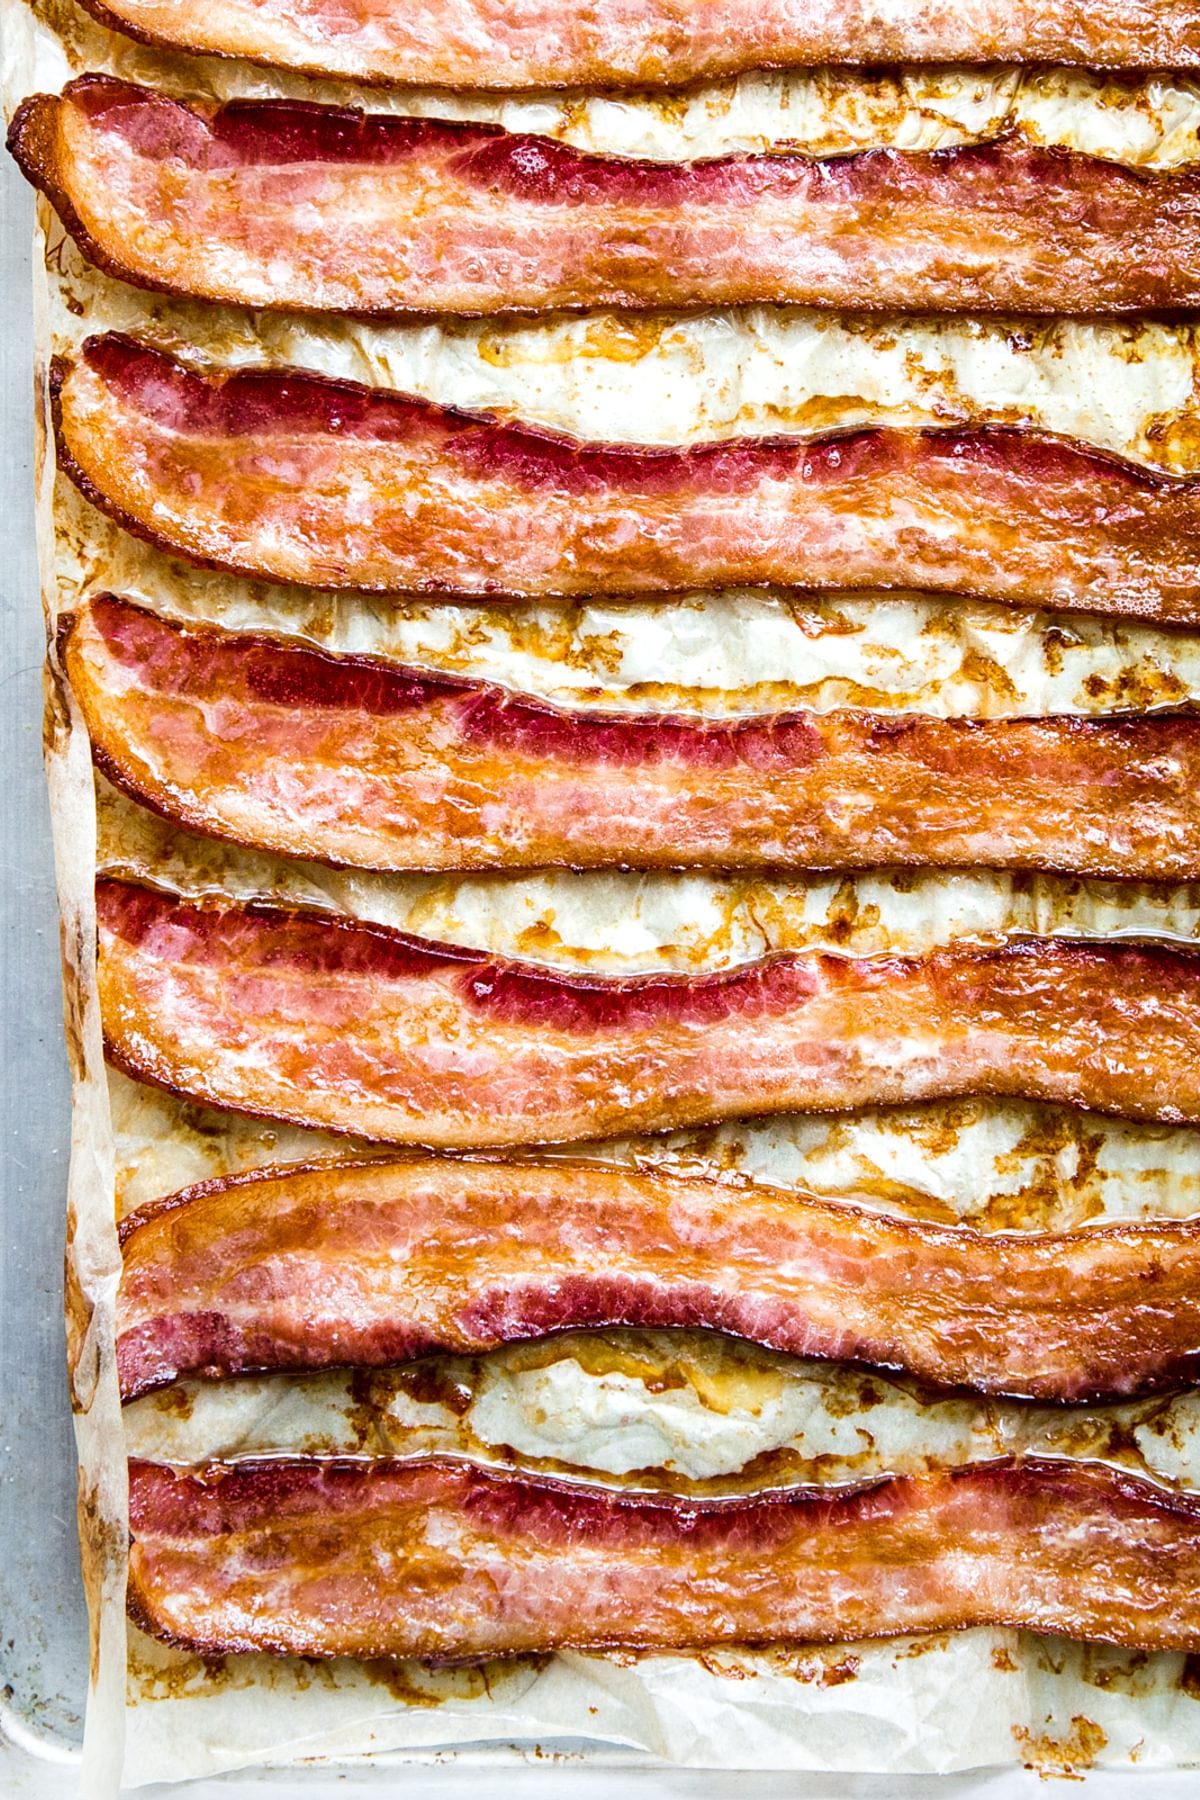 8 slices of bacon cooked in the oven on a parchment paper lined baking sheet